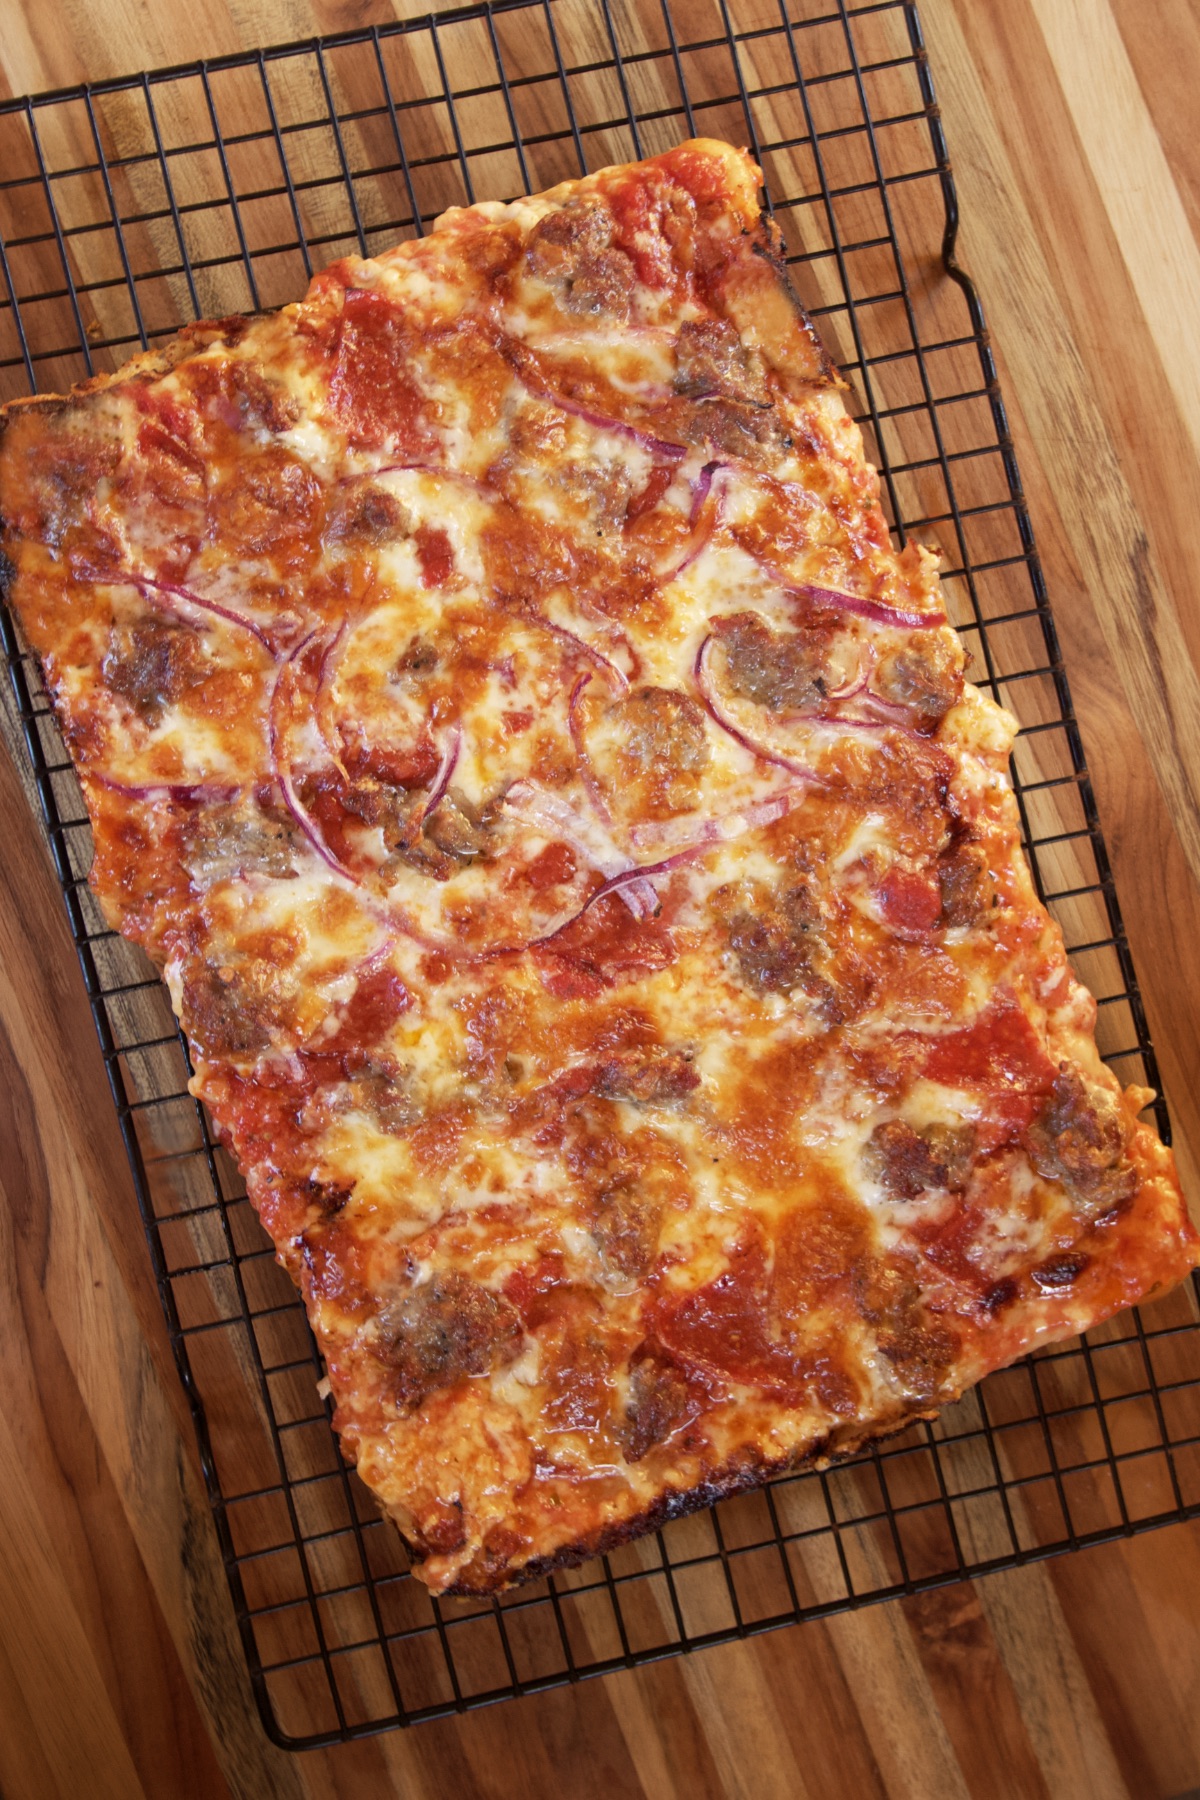 A homemade pan pizza topped with sausage, pepperoni, and onions, cooling on a wire rack.